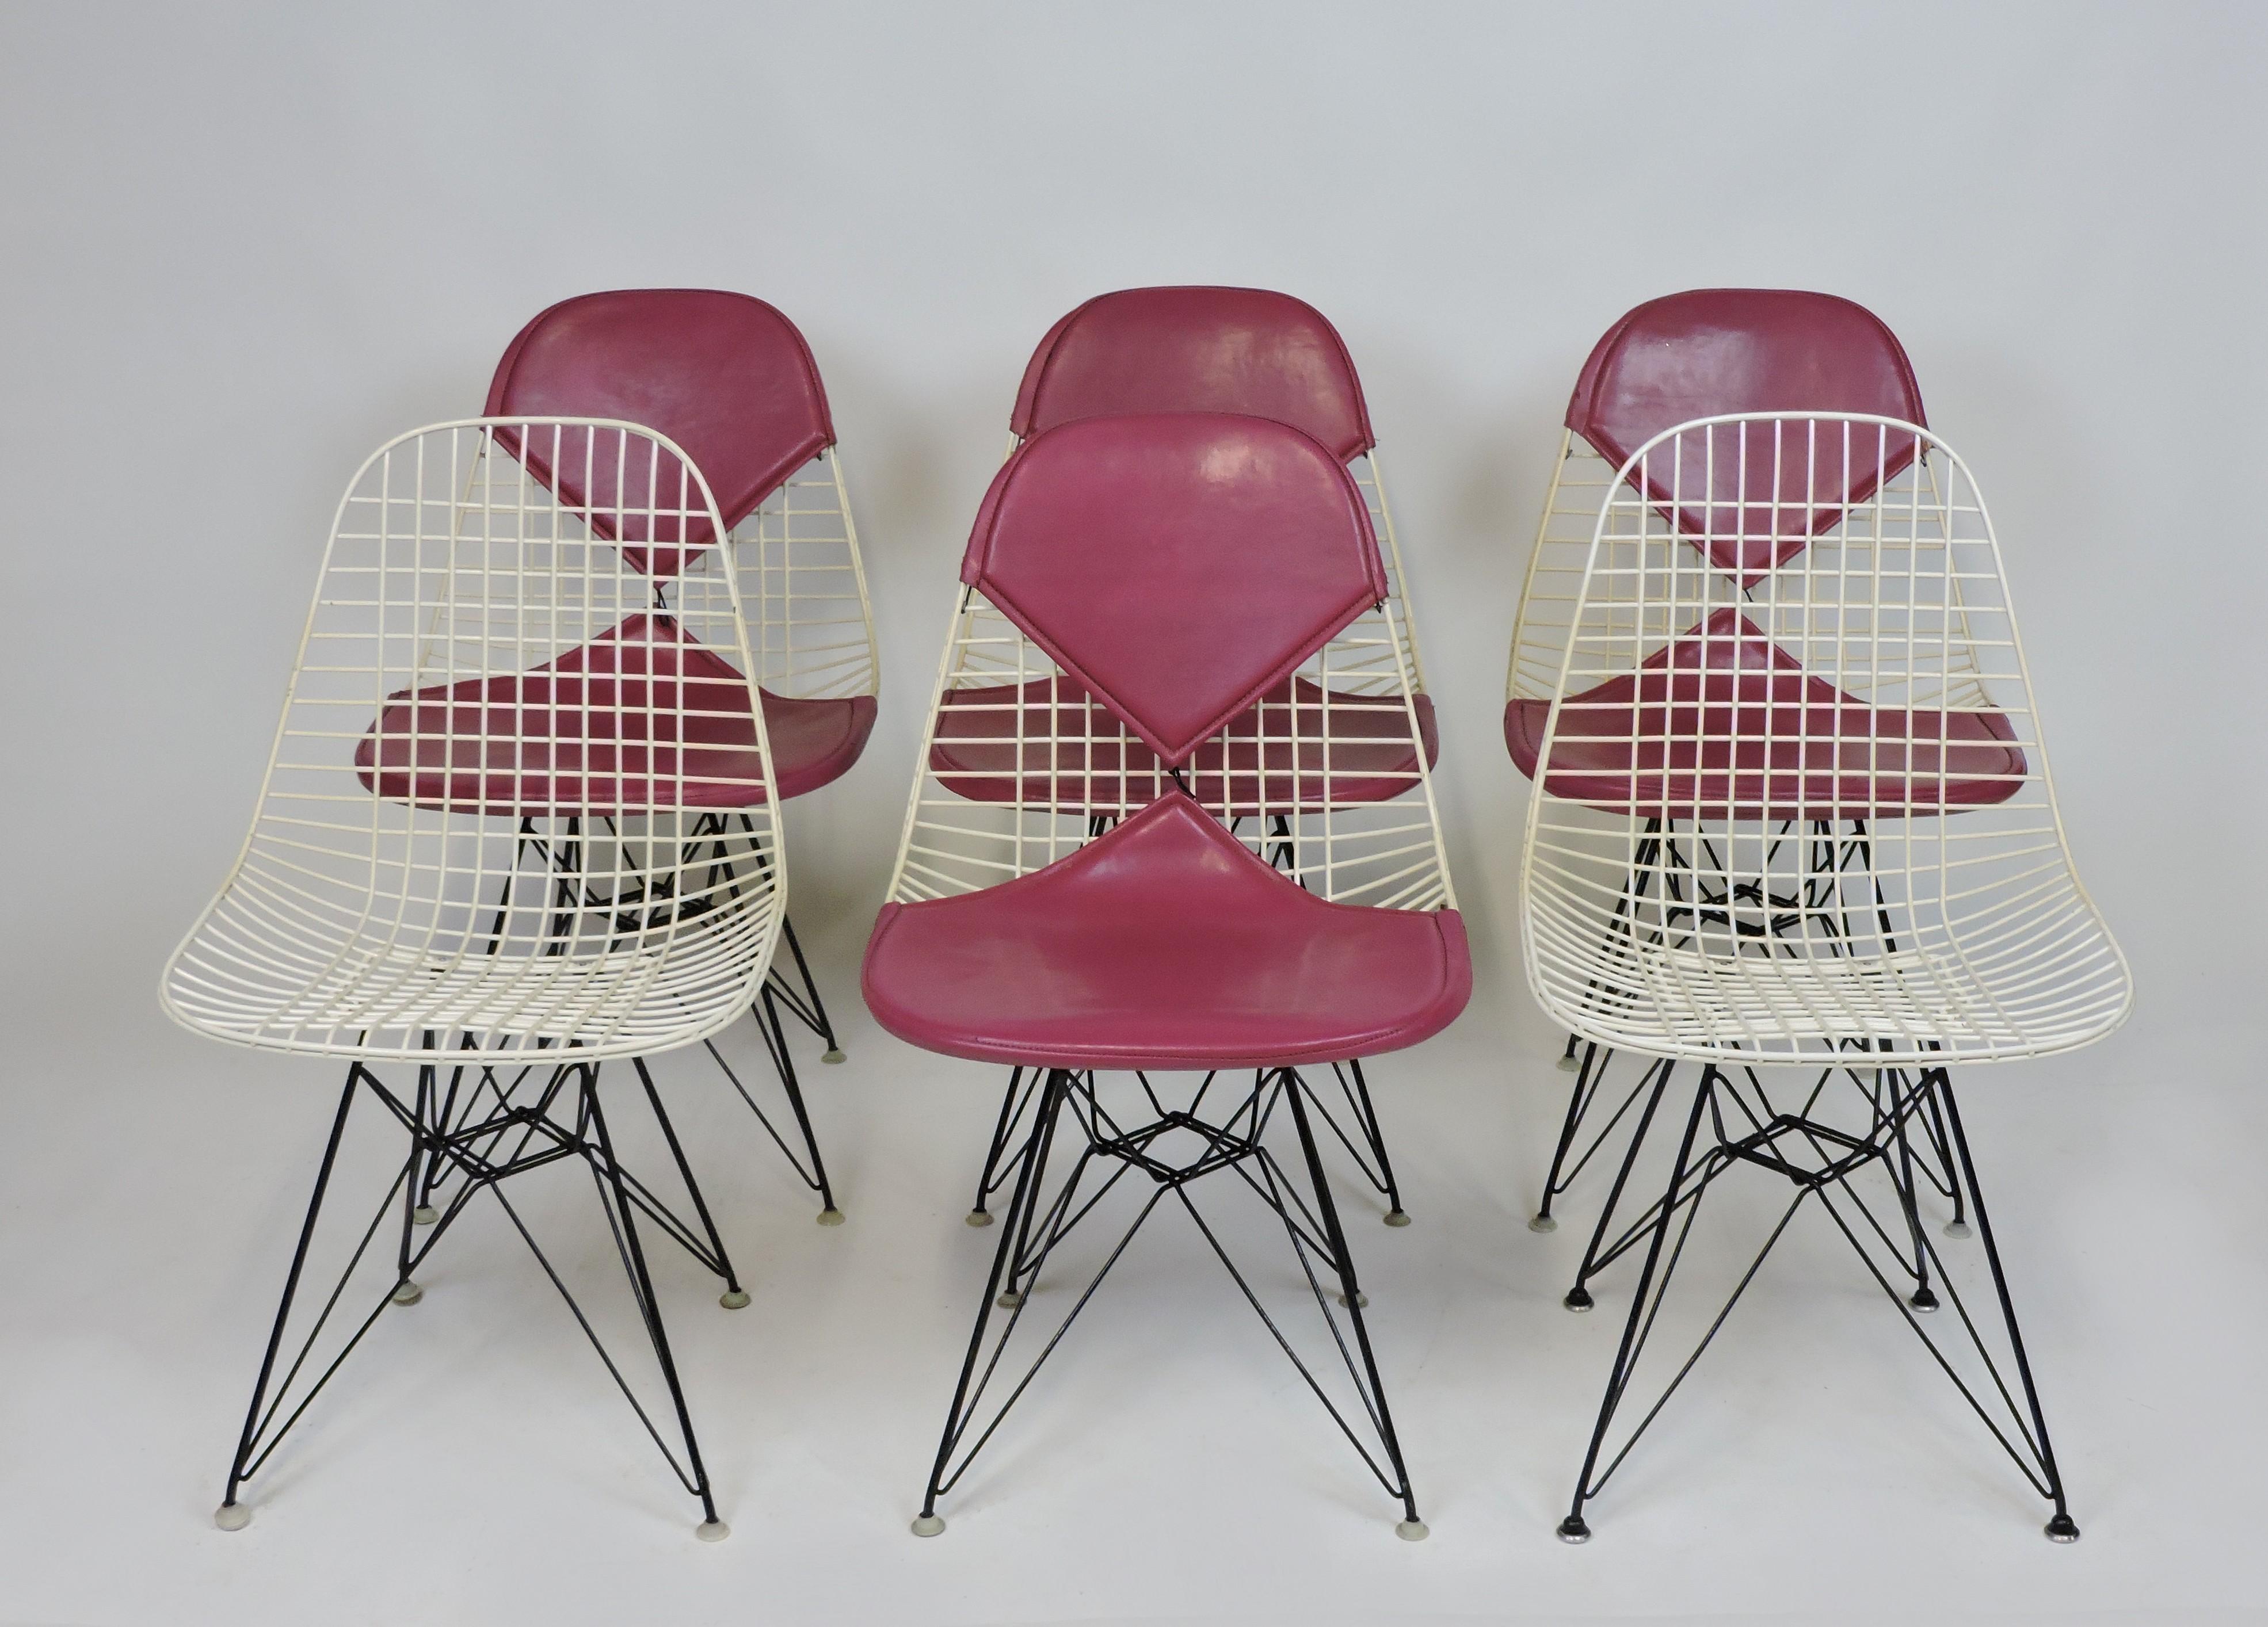 Very nice set of six early wire chairs designed by Charles and Ray Eames and manufactured by Herman Miller. These comfortable and light weight chairs have a white wire top and black Eiffel tower legs. Four of the chairs have magenta colored